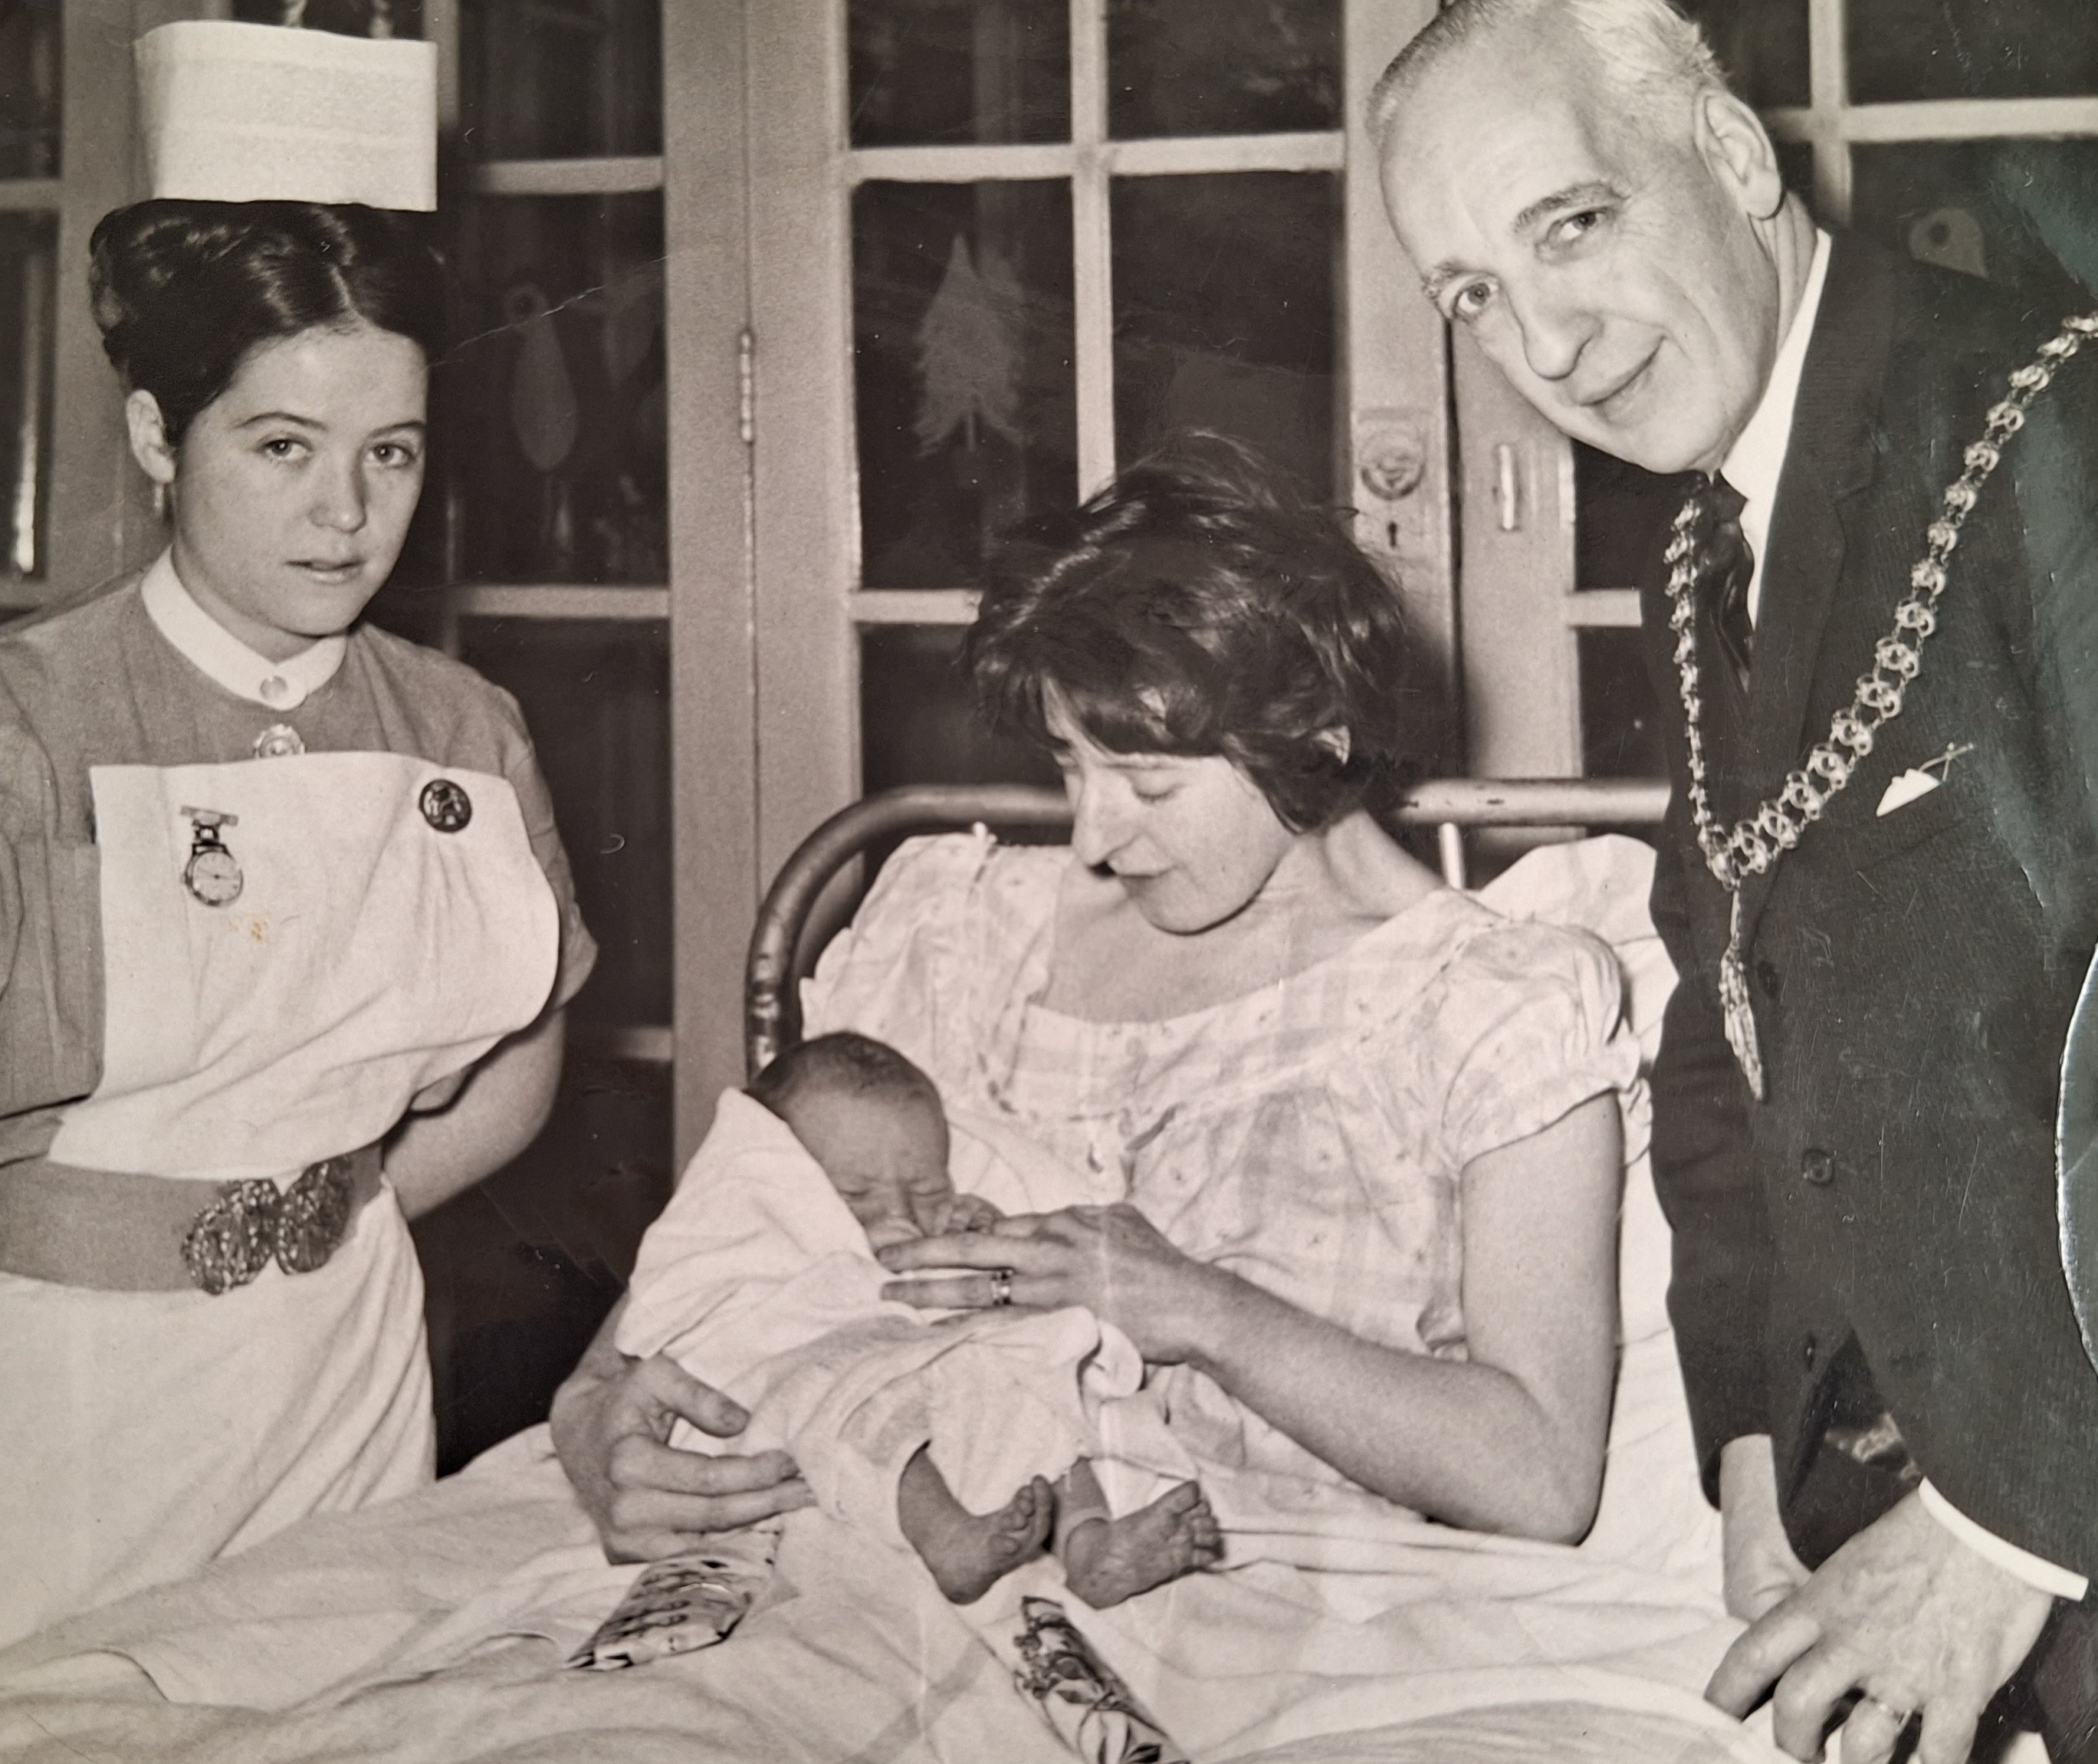 Marcella Warburton as a young nurse, during a civic visit to a Christmas day baby. Image shows Marcella in old-fashioned nurse's uniform, with a woman in bed holding a baby and a man wearing mayoral chains